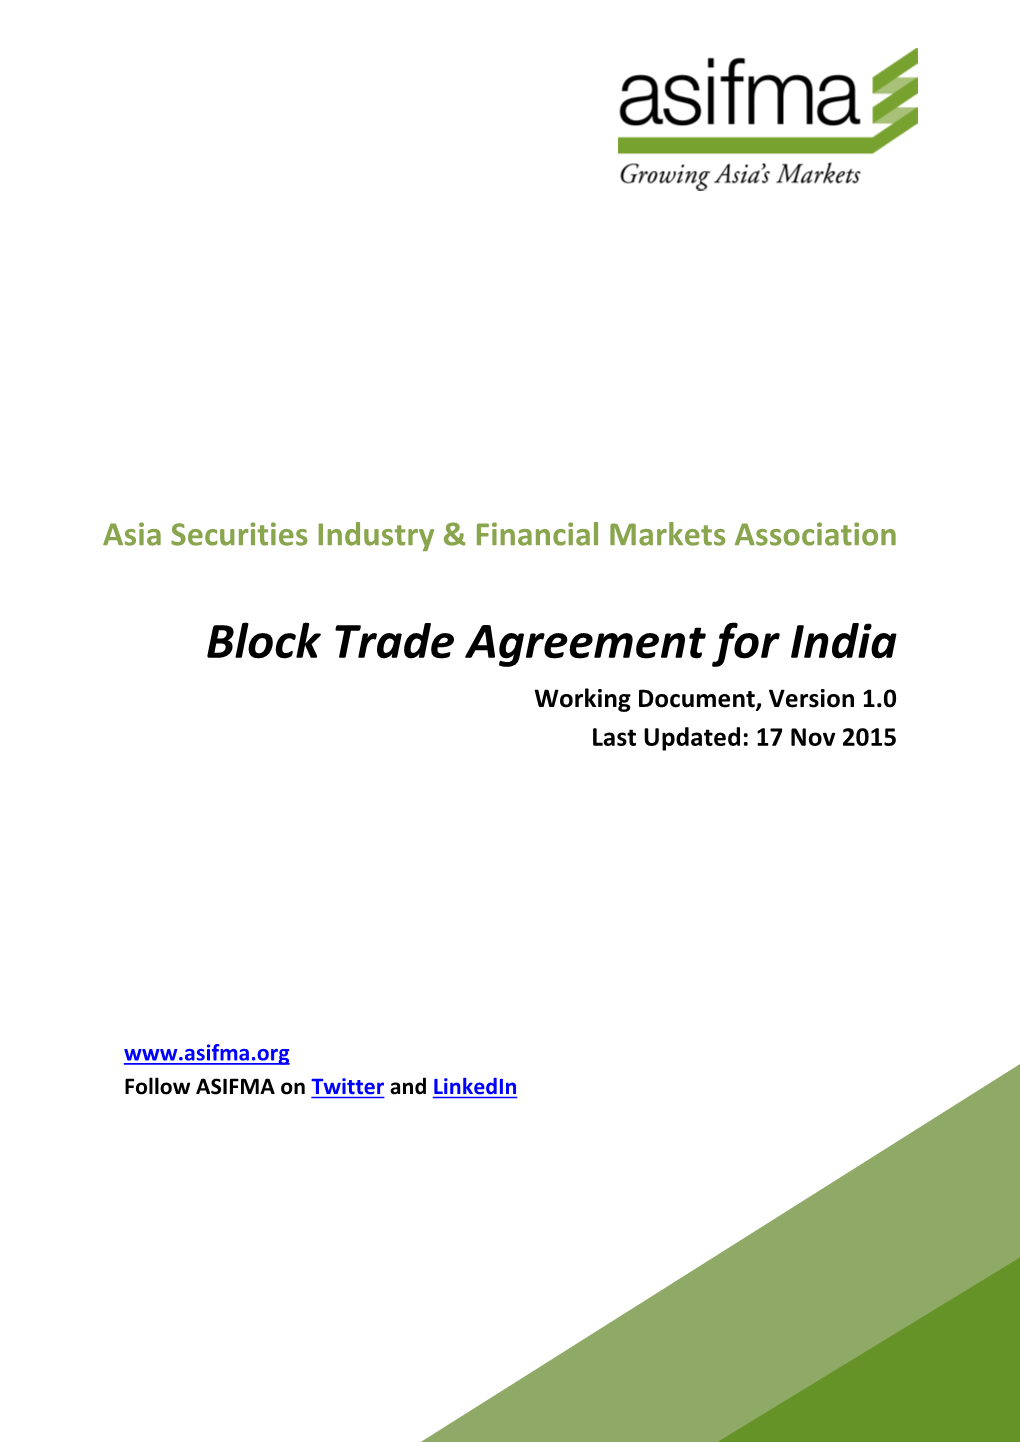 Block Trade Agreement for India Working Document, Version 1.0 Last Updated: 17 Nov 2015